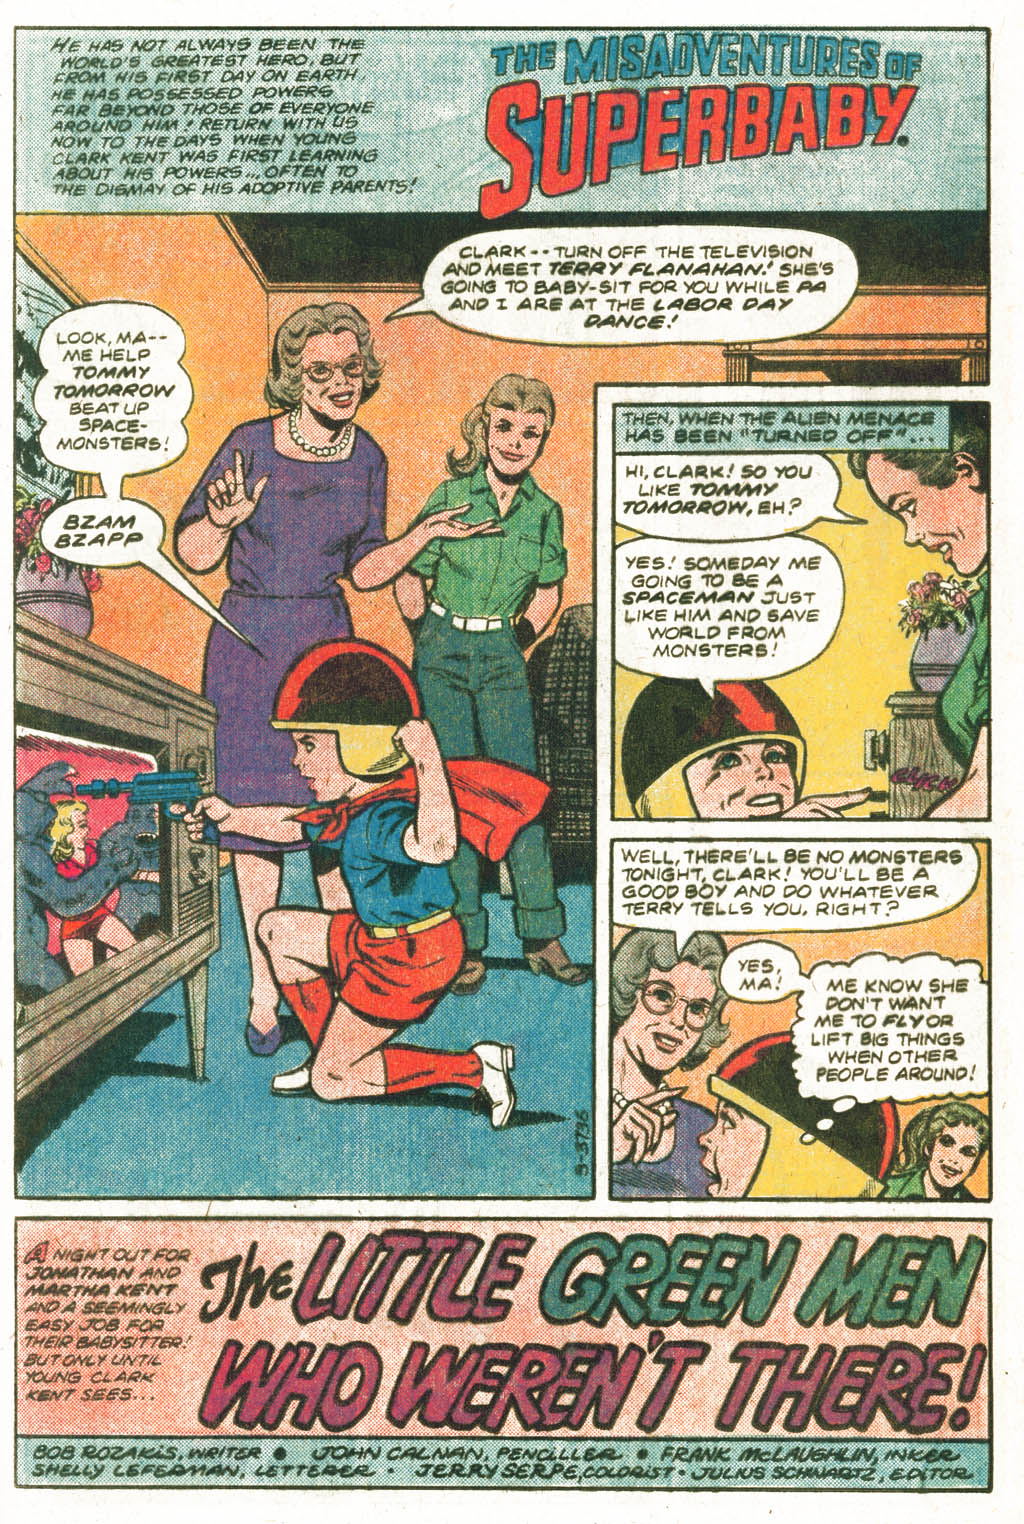 The New Adventures of Superboy 24 Page 20